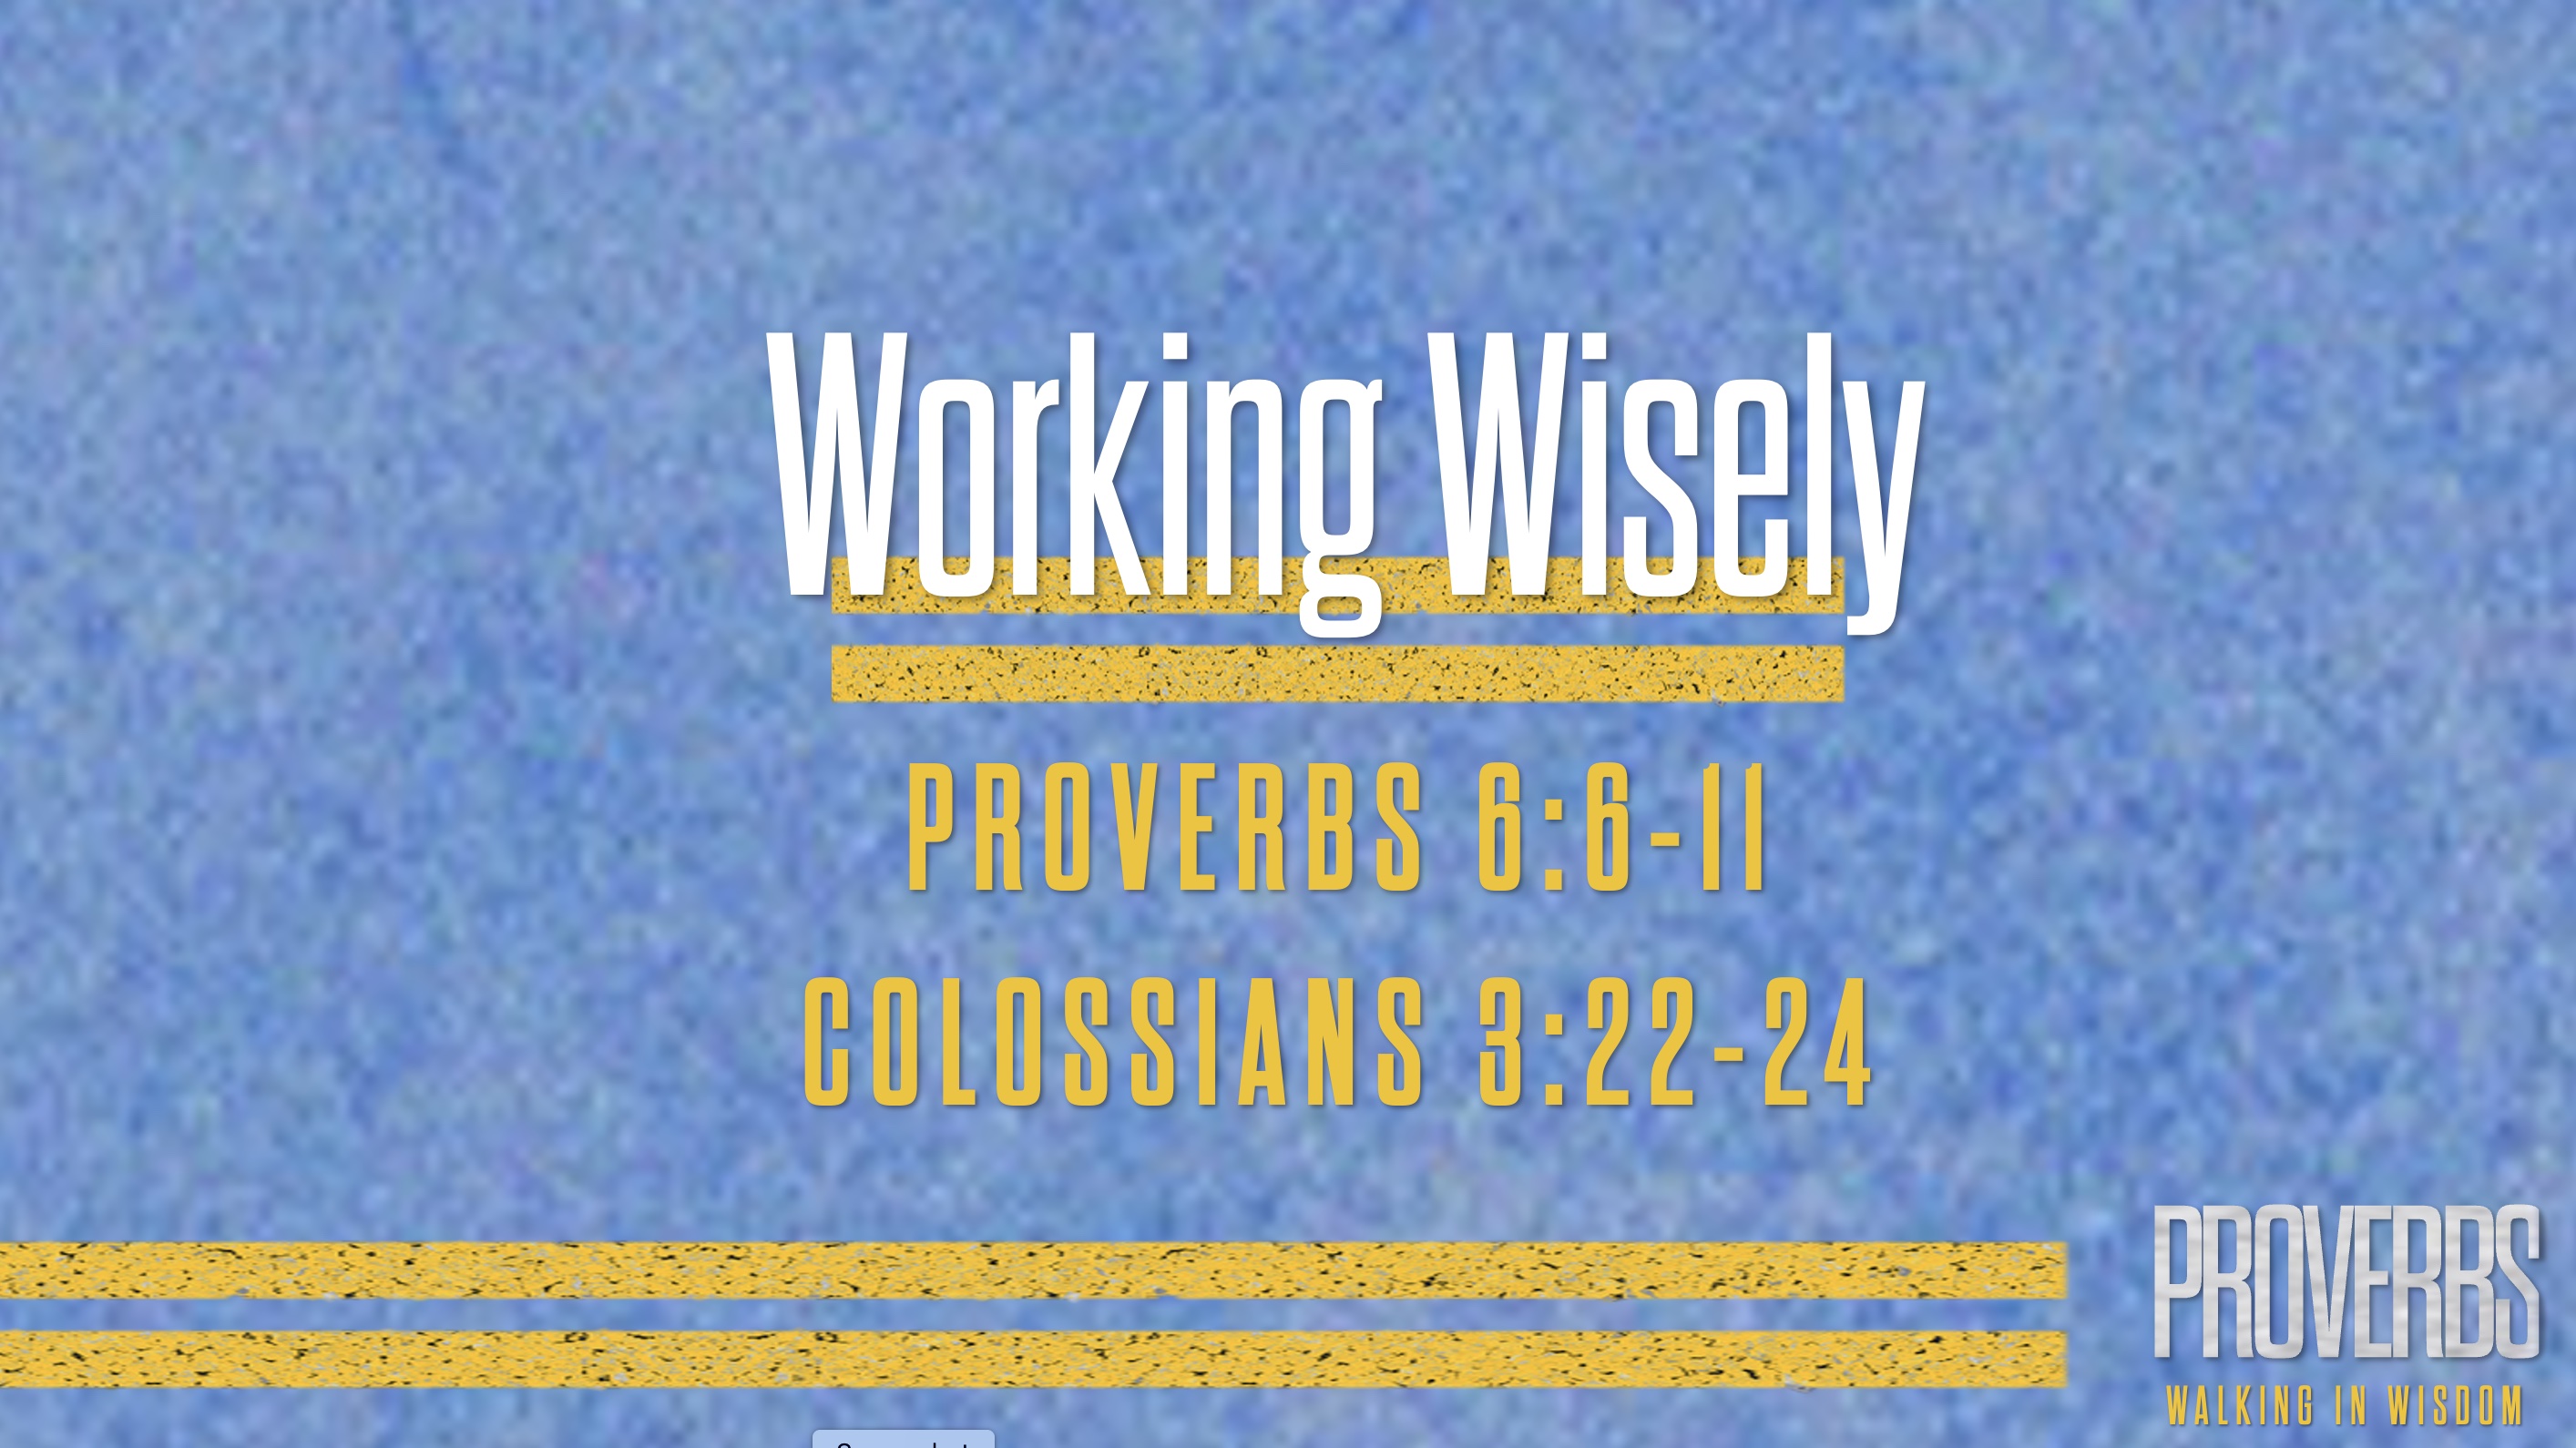 Working Wisely (Proverbs 6:6-11)